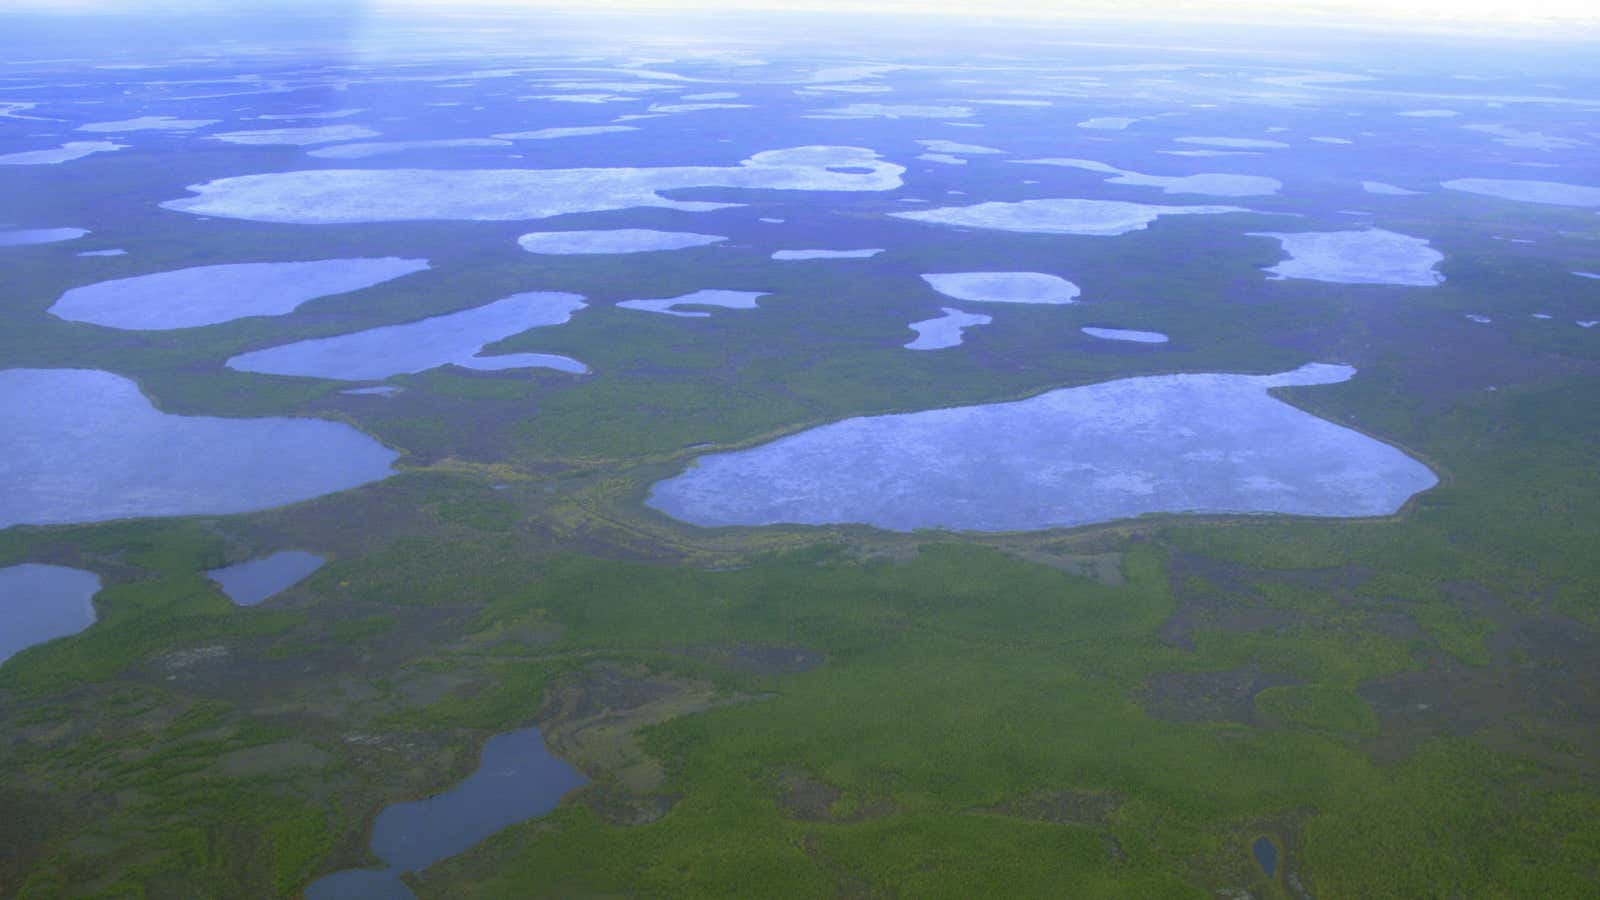 As the permafrost thaws, it often forms “lakes” of meltwater like these in Siberia, which accelerate the thawing further. Now we know there is lots of mercury in there too.